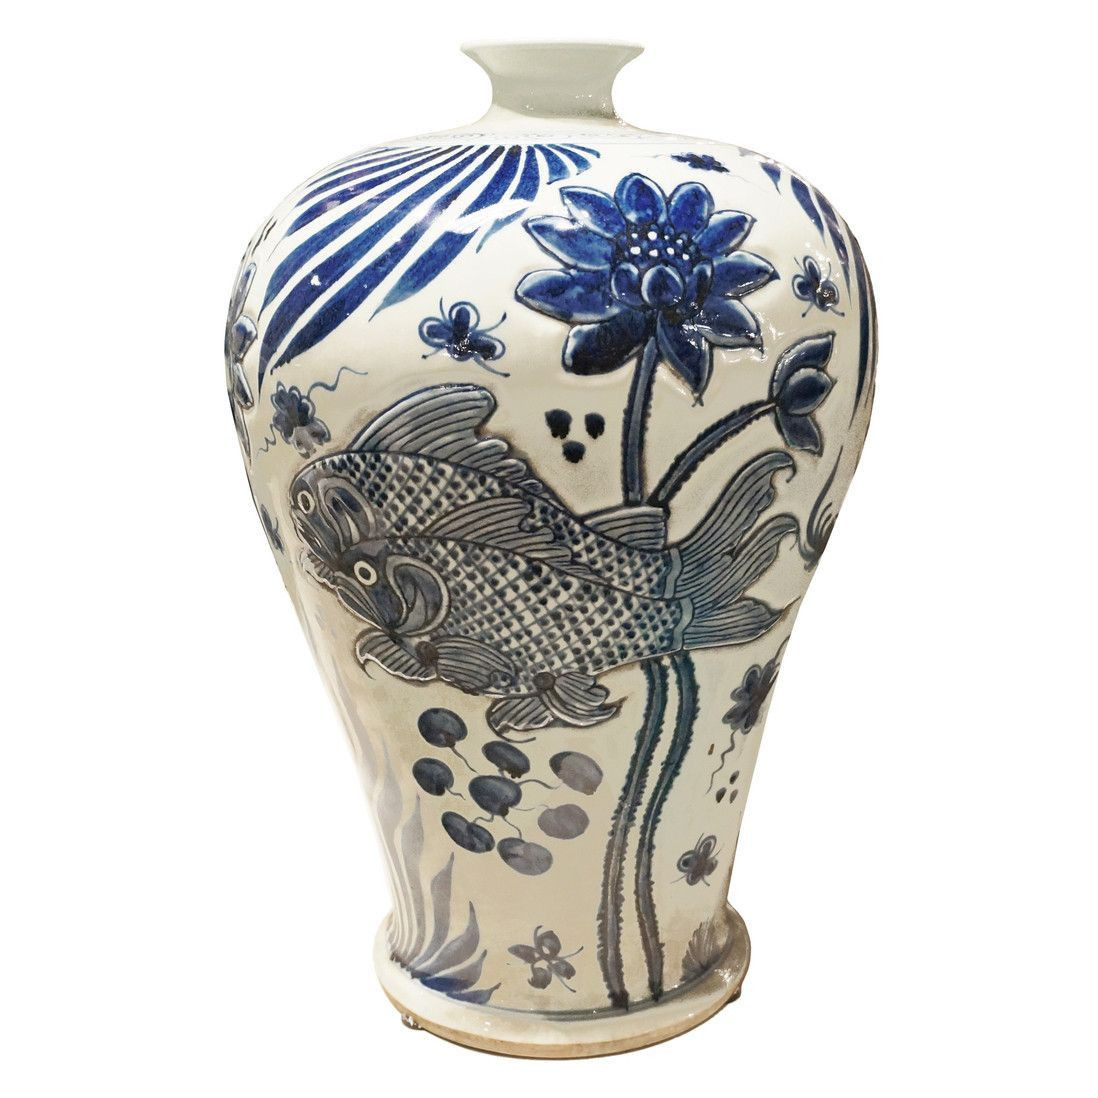 17 Lovely Blue and White Vases Cheap 2024 free download blue and white vases cheap of carved fish chinoiserie plum vase blue white products with regard to carved fish chinoiserie plum vase blue white